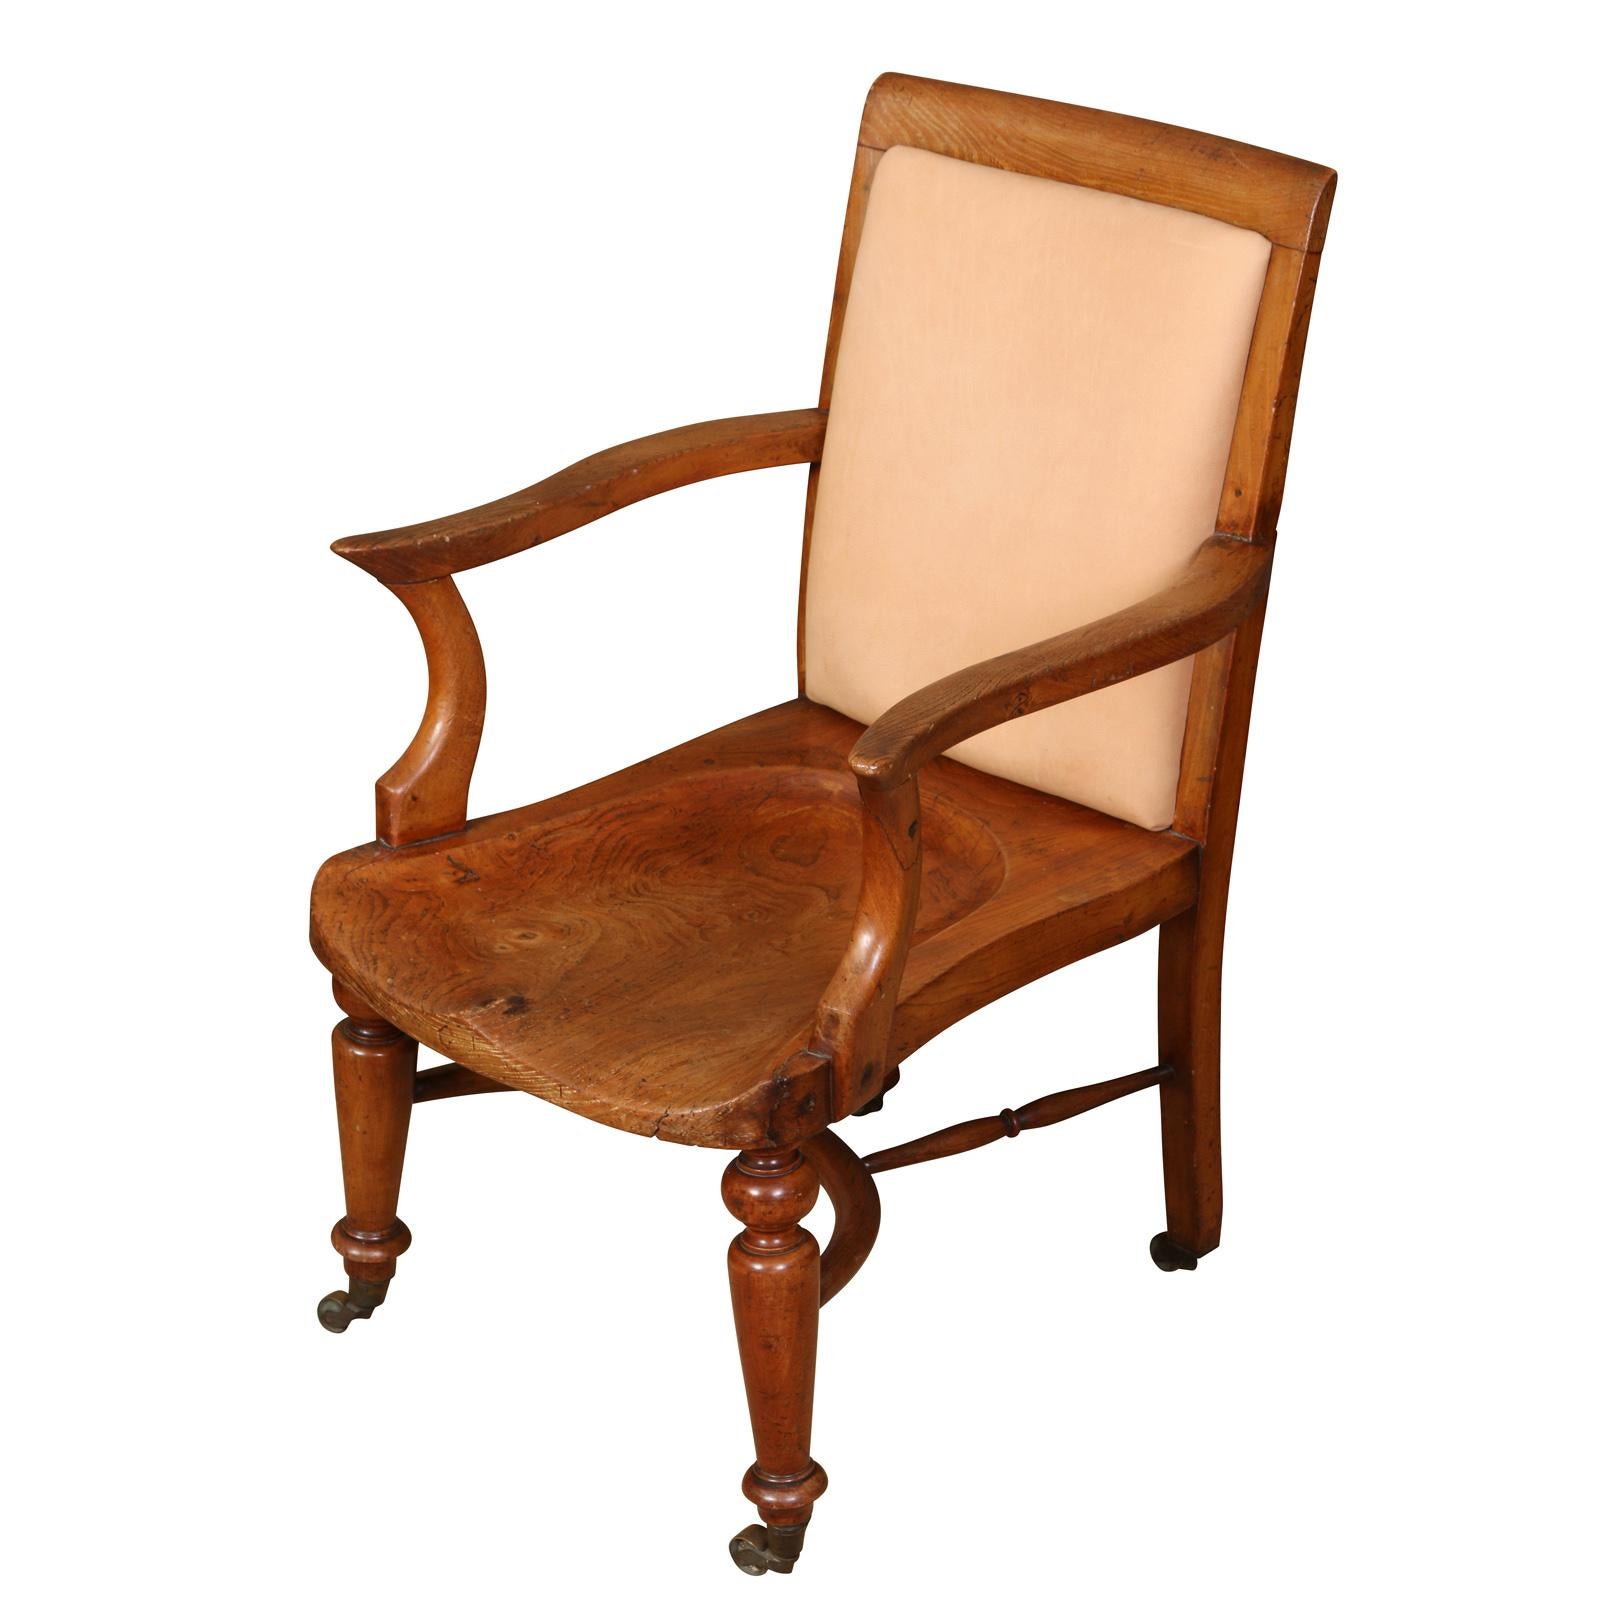 An English vintage armchair with a straight back, curved arms and turned legs ending in casters. The seat back has an inset upholstered cream leather pad and the seat is comfortably shaped without a cushion. The arms are each curved and end with